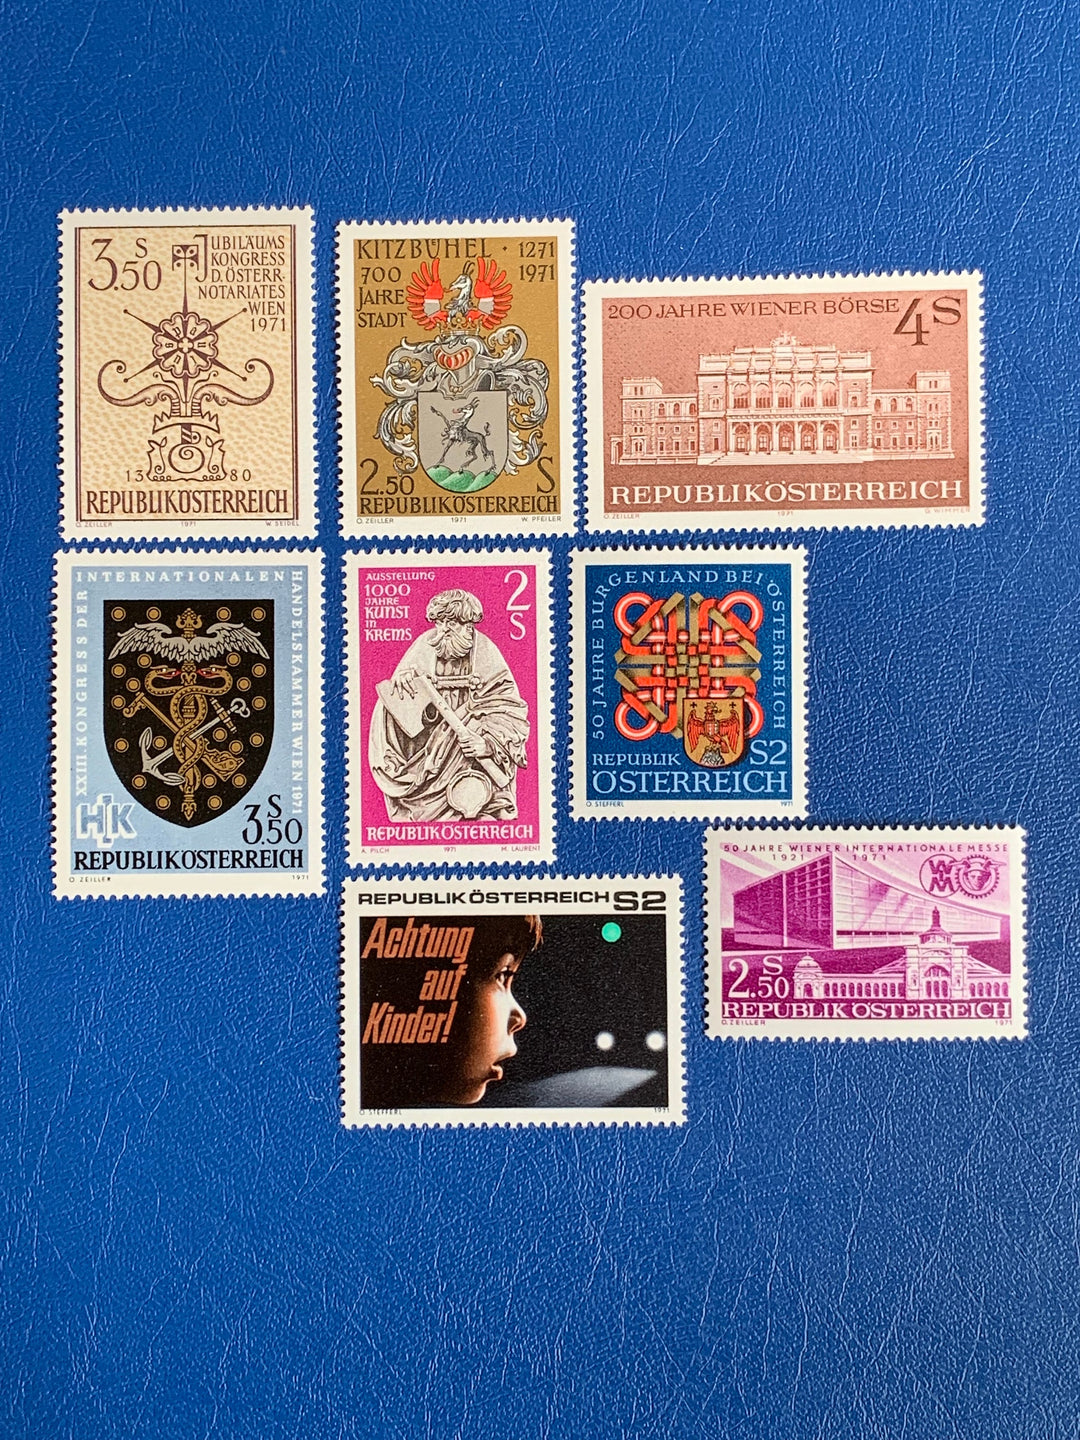 Austria - Original Vintage Postage Stamps - 1971 - for the collector, artist or crafter - scrapbooks,journals, decoupage